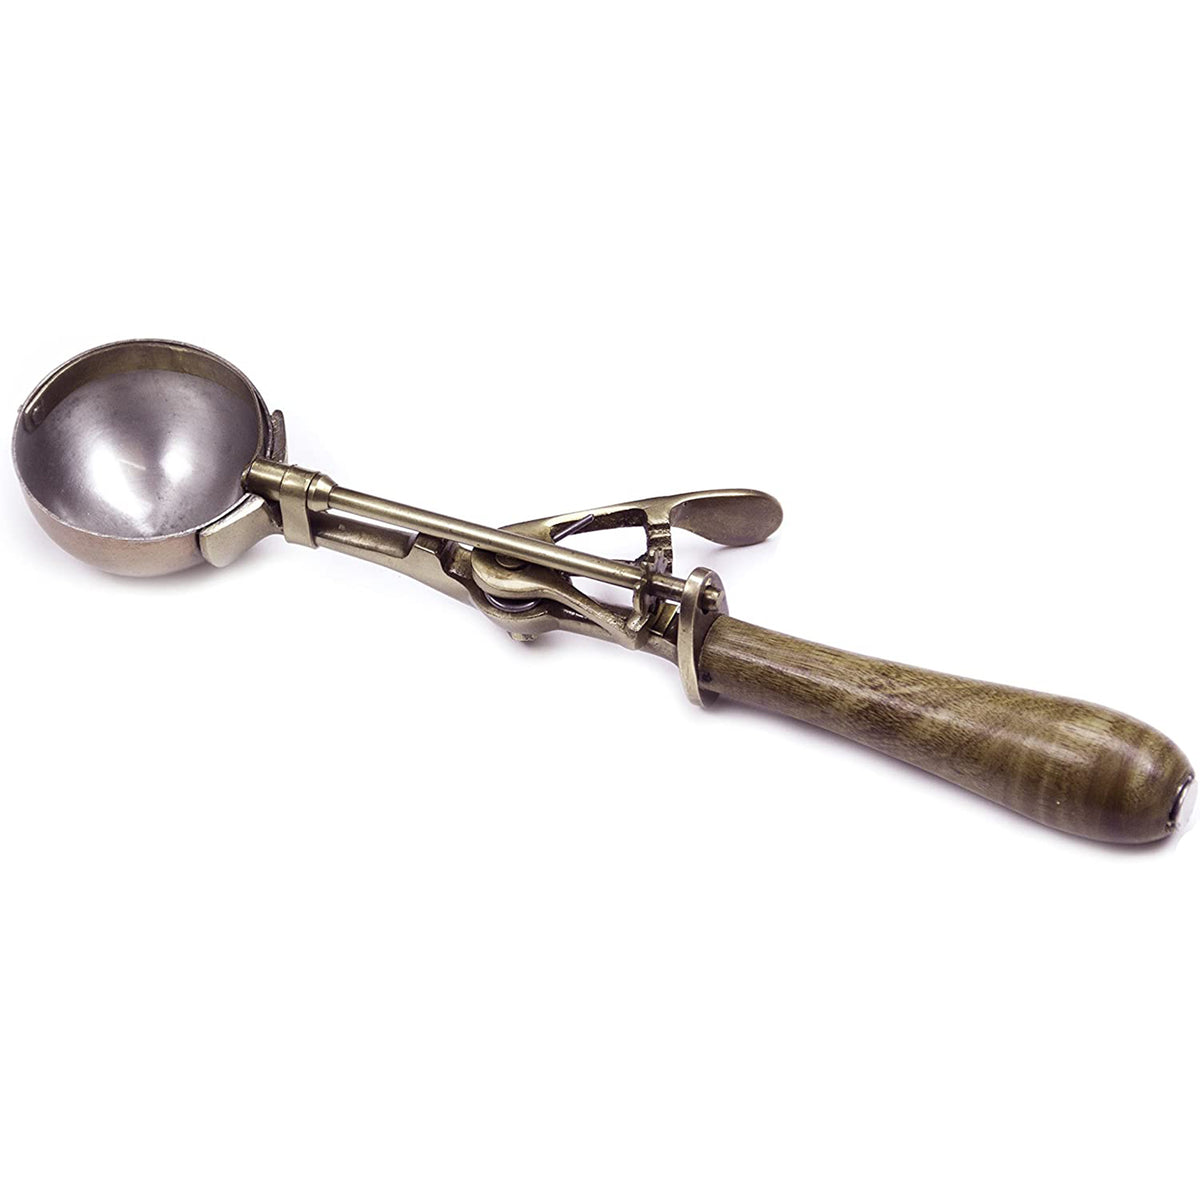 Vintage LARGE or SMALL Ice Cream Scoop, Thumb Release Ice Cream Shop Scoop  Full Size Ice Cream Scoop-small Cookie Dough or Meatball Scoop 